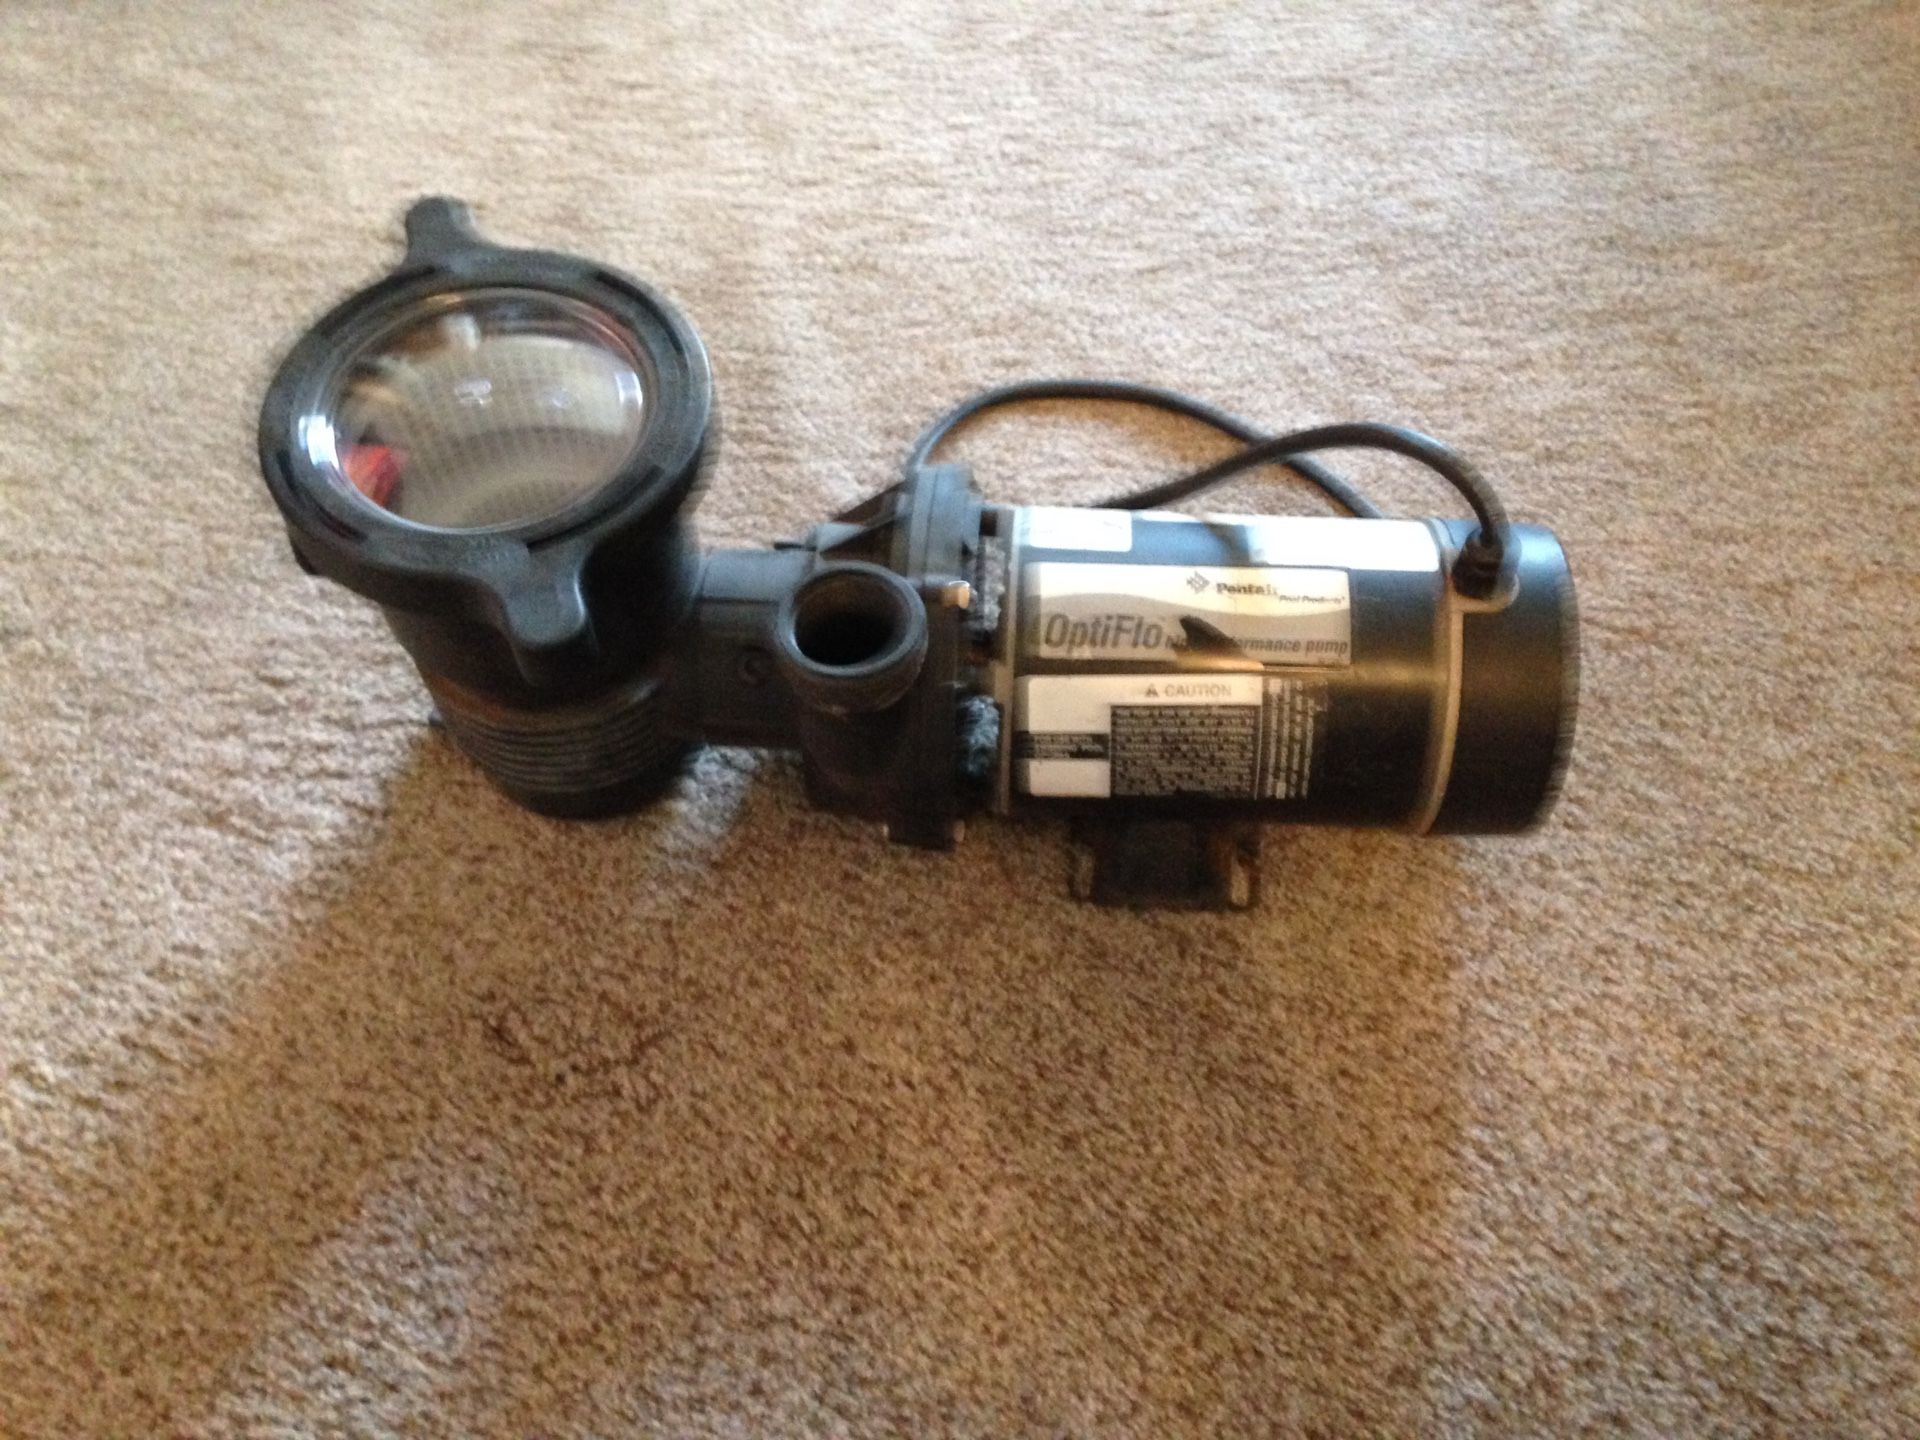 Swimming pool filter. Pentair 1 hp rebuilt excellent condition. Will work for spa or pool. $200.00